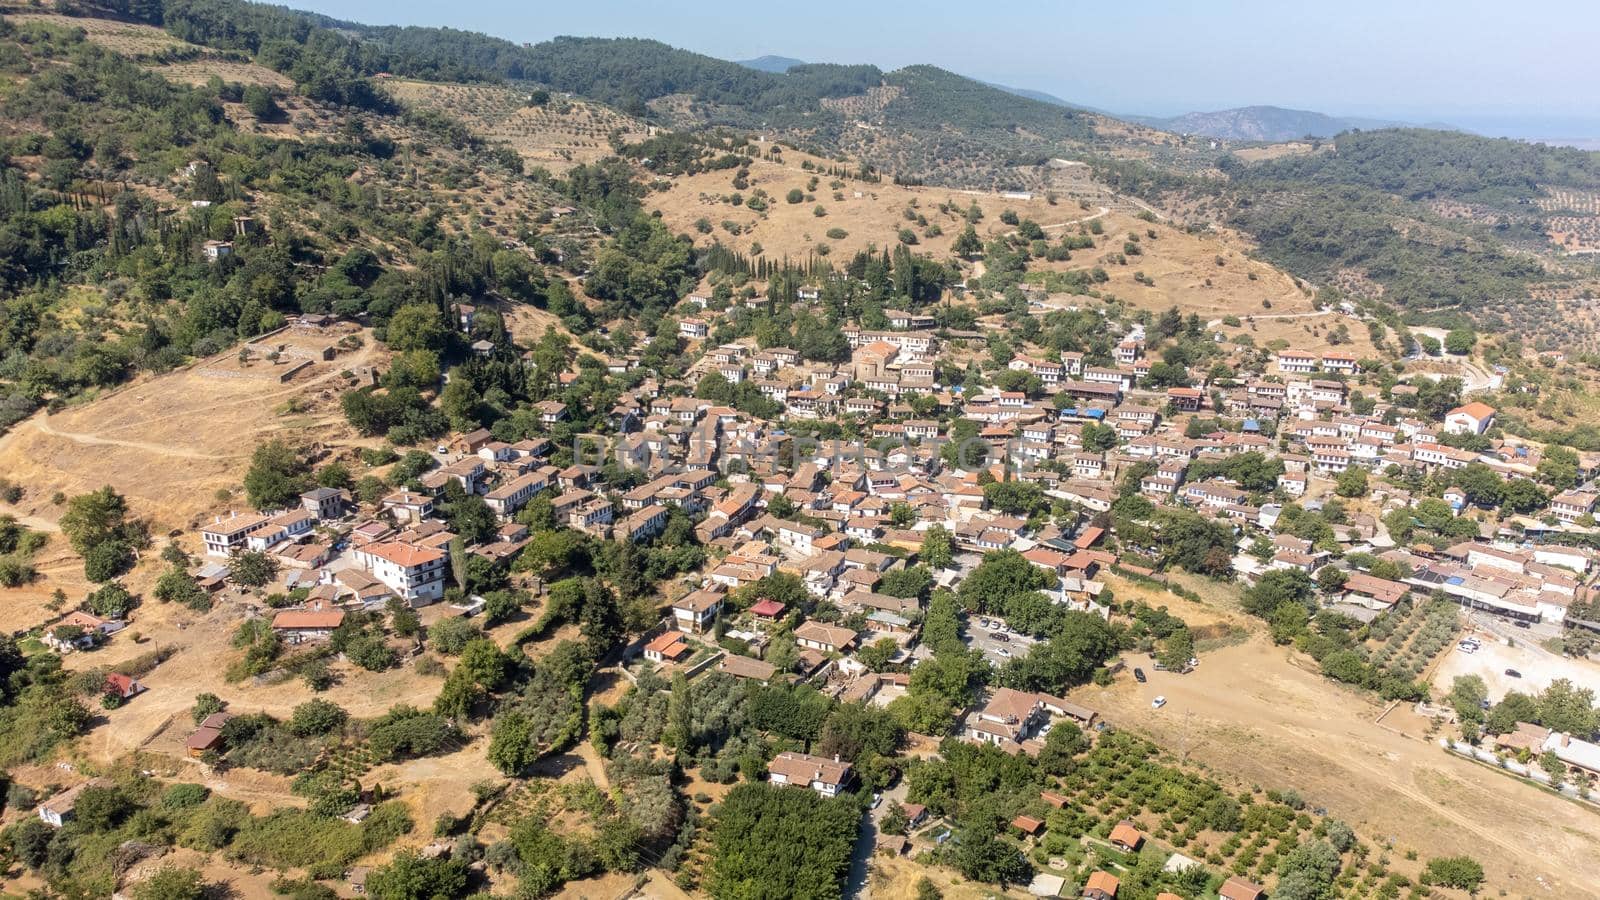 View of the old Sirince houses on the mountain slope. sirince is an old village of Selcuk, which is a district centre of Izmir. It is famous with its old Greek architecture and local wine. by senkaya